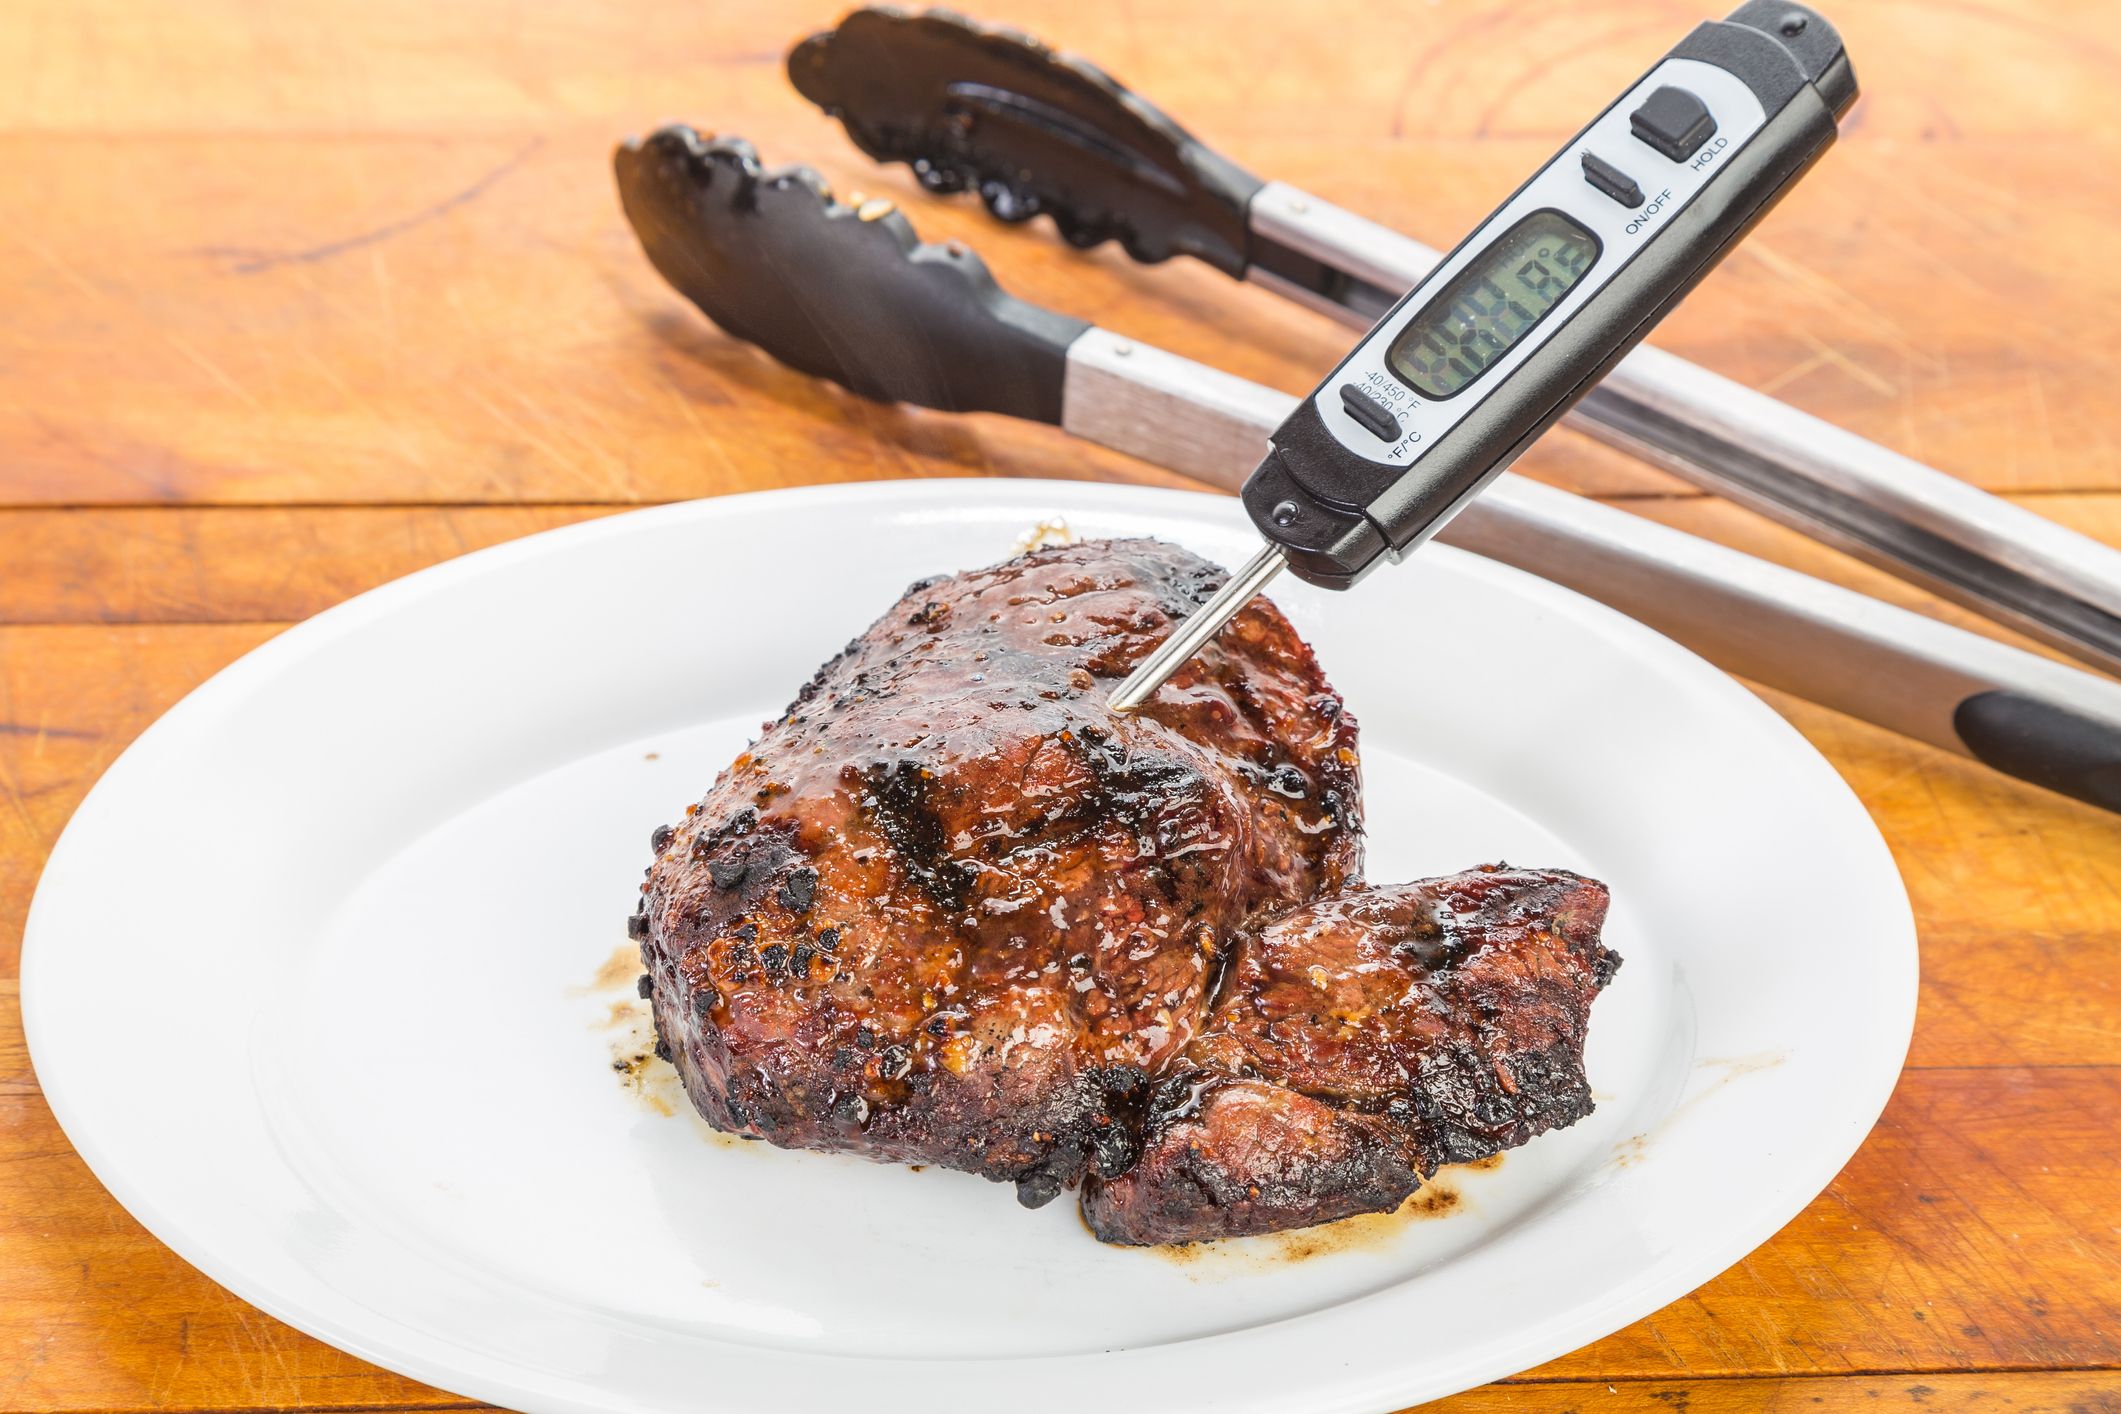 https://hips.hearstapps.com/hmg-prod/images/using-meat-thermometer-1645215936.jpg